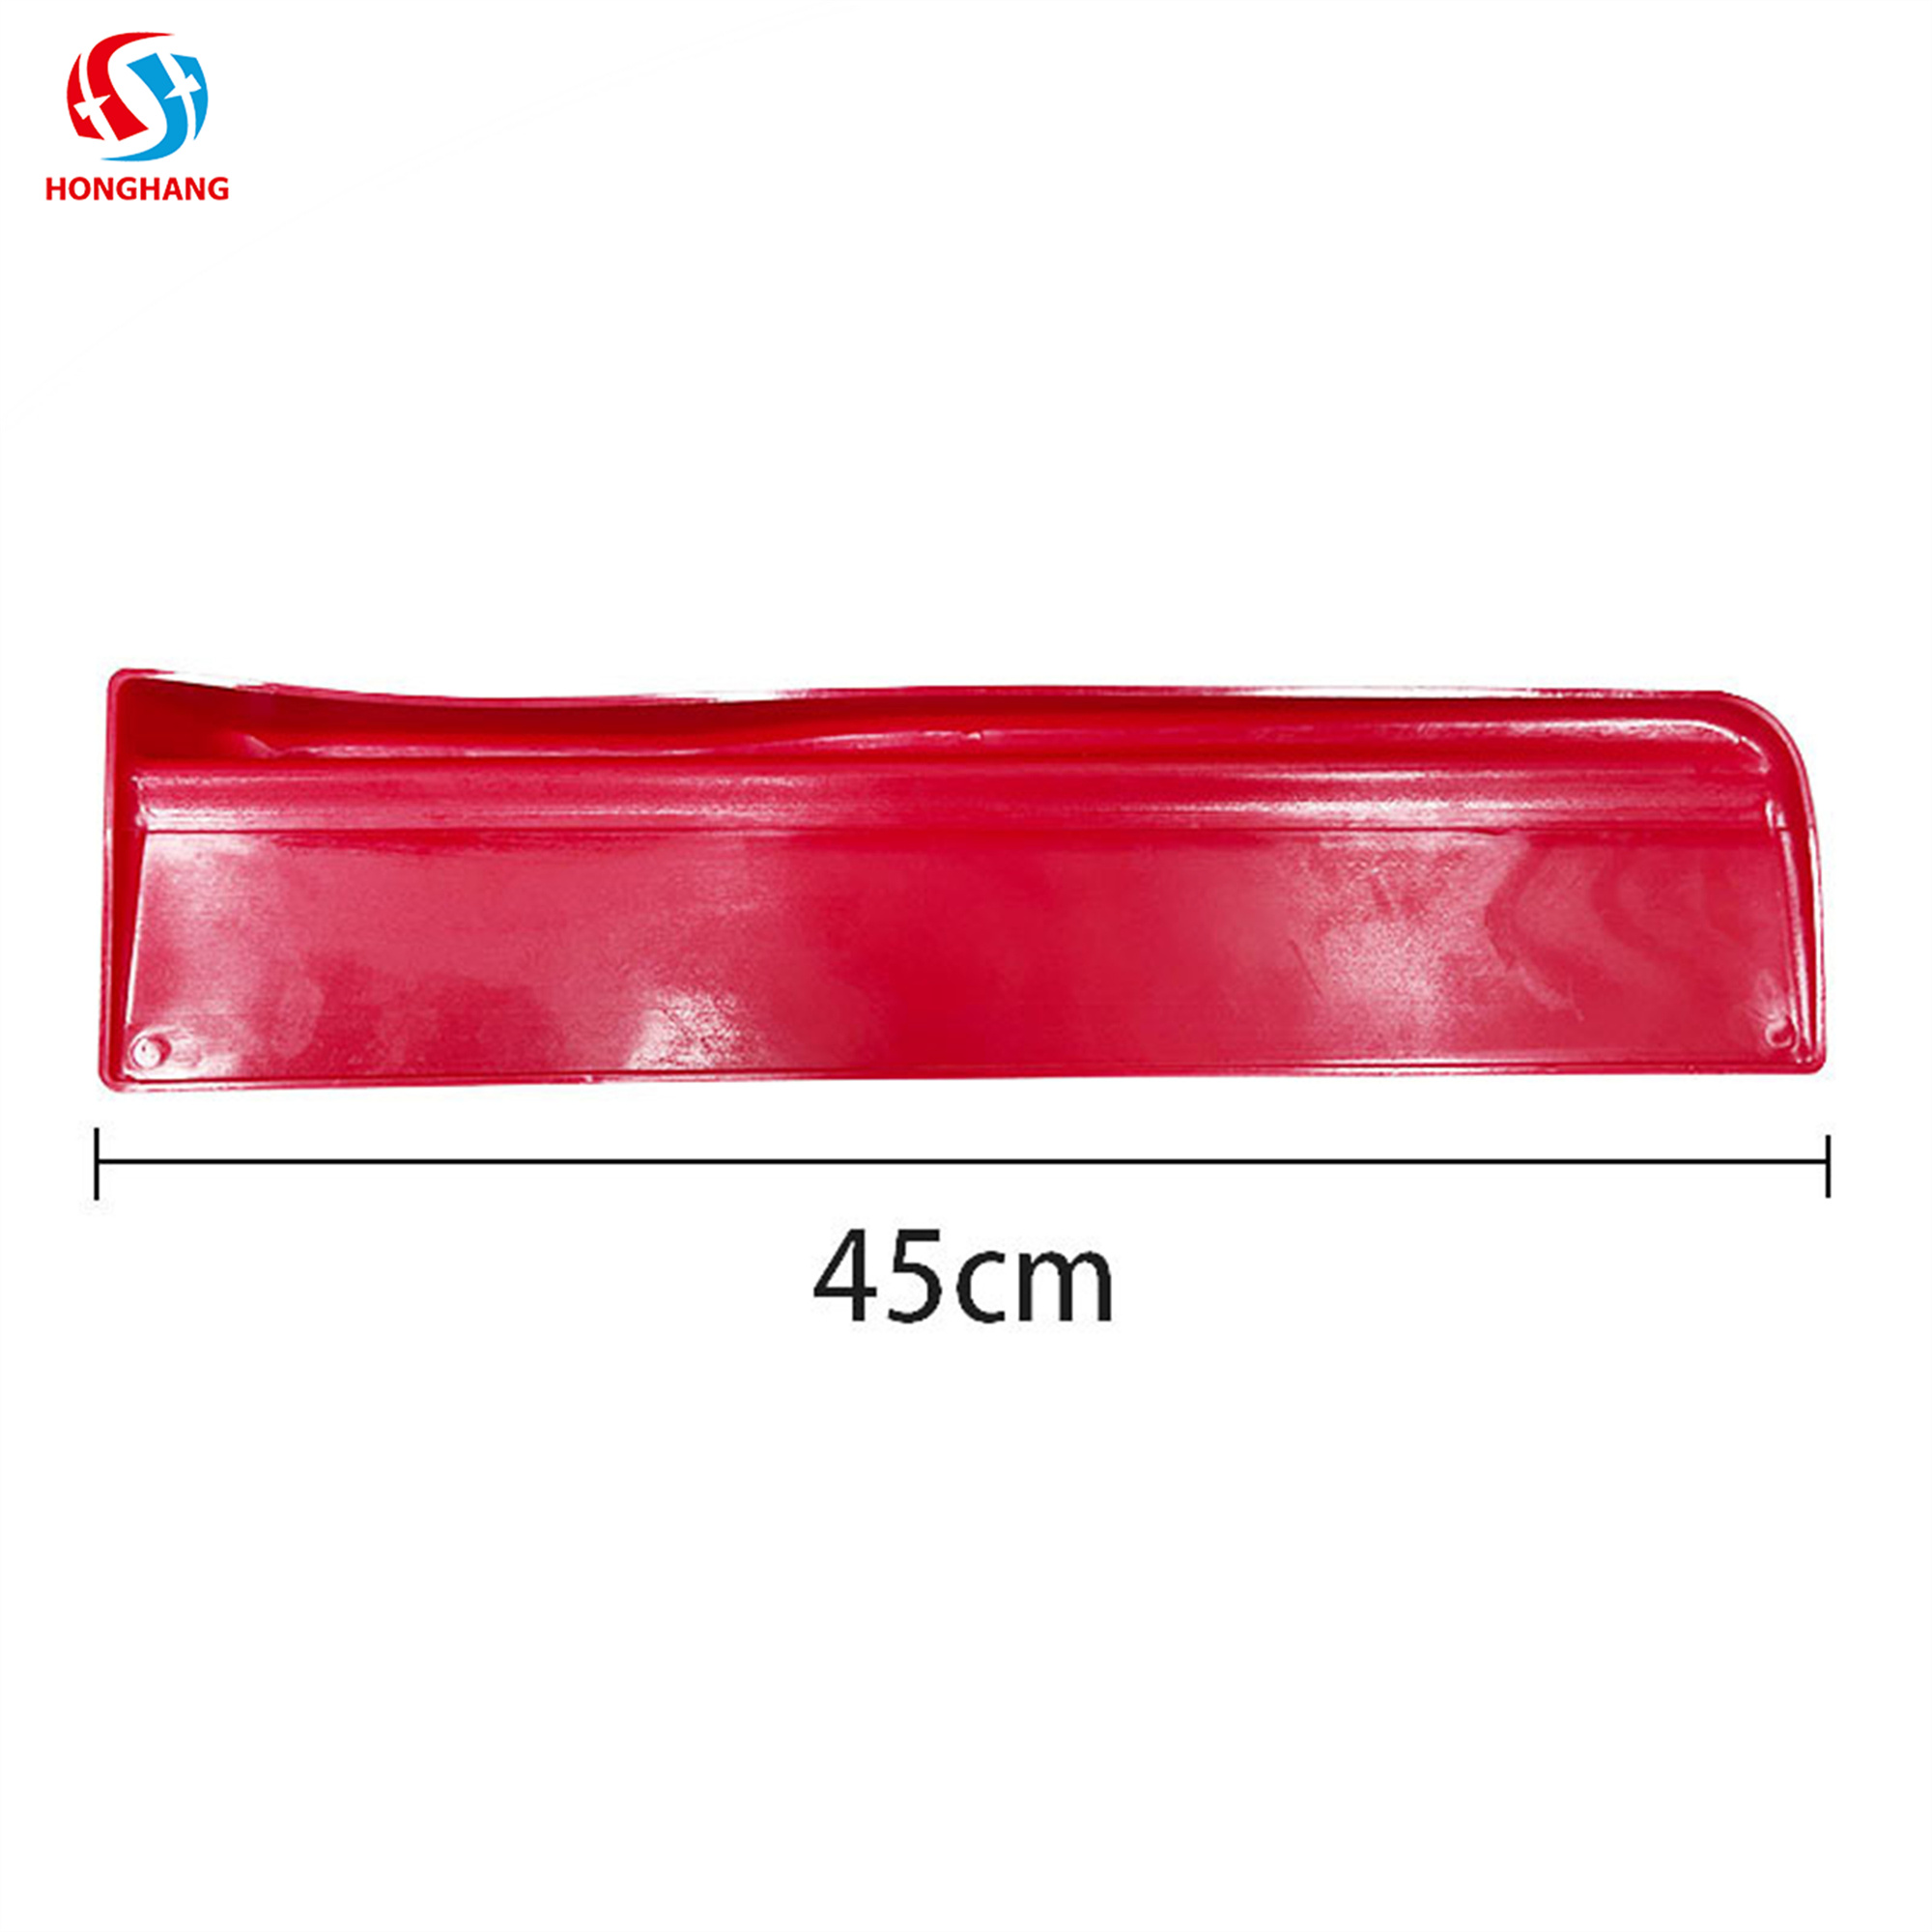 Universal Type I 2pcs Small Car Side Body Protector Lip Side Skirts Spoiler For All Cars Toyota Honda Benz BMW Audi VW